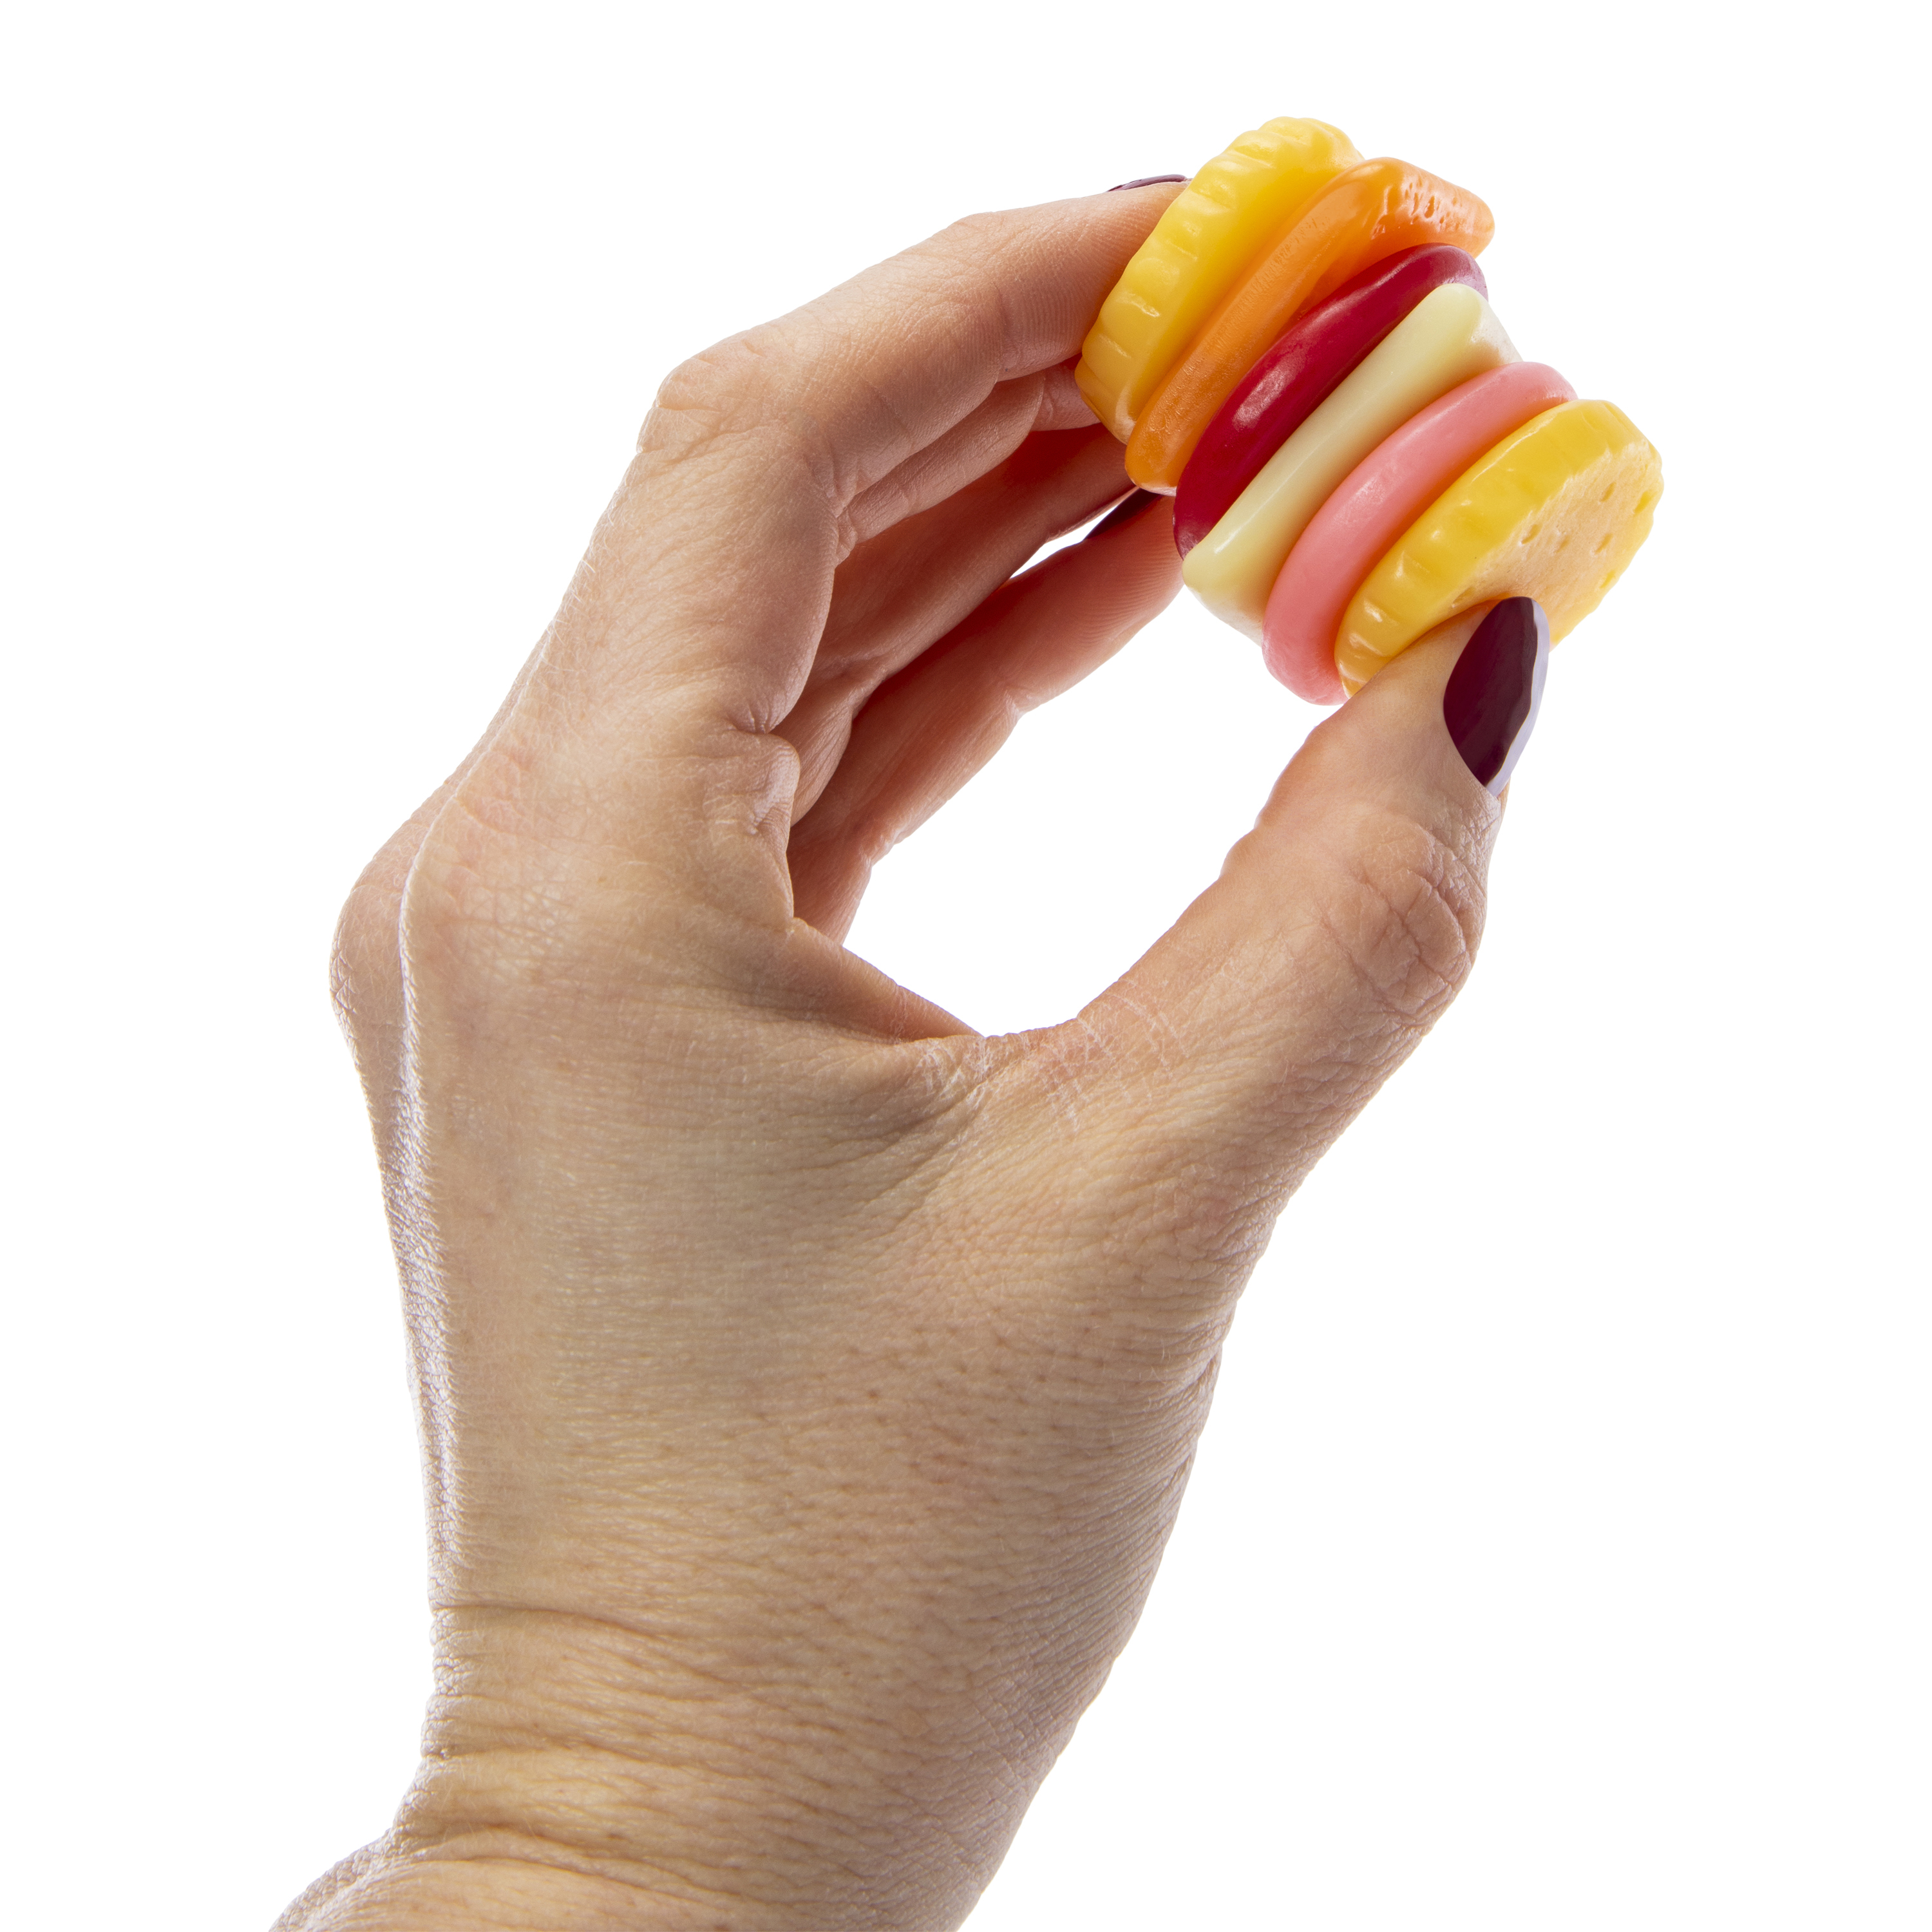 Valentine's Lunchables® Gummy Candy 2.25oz